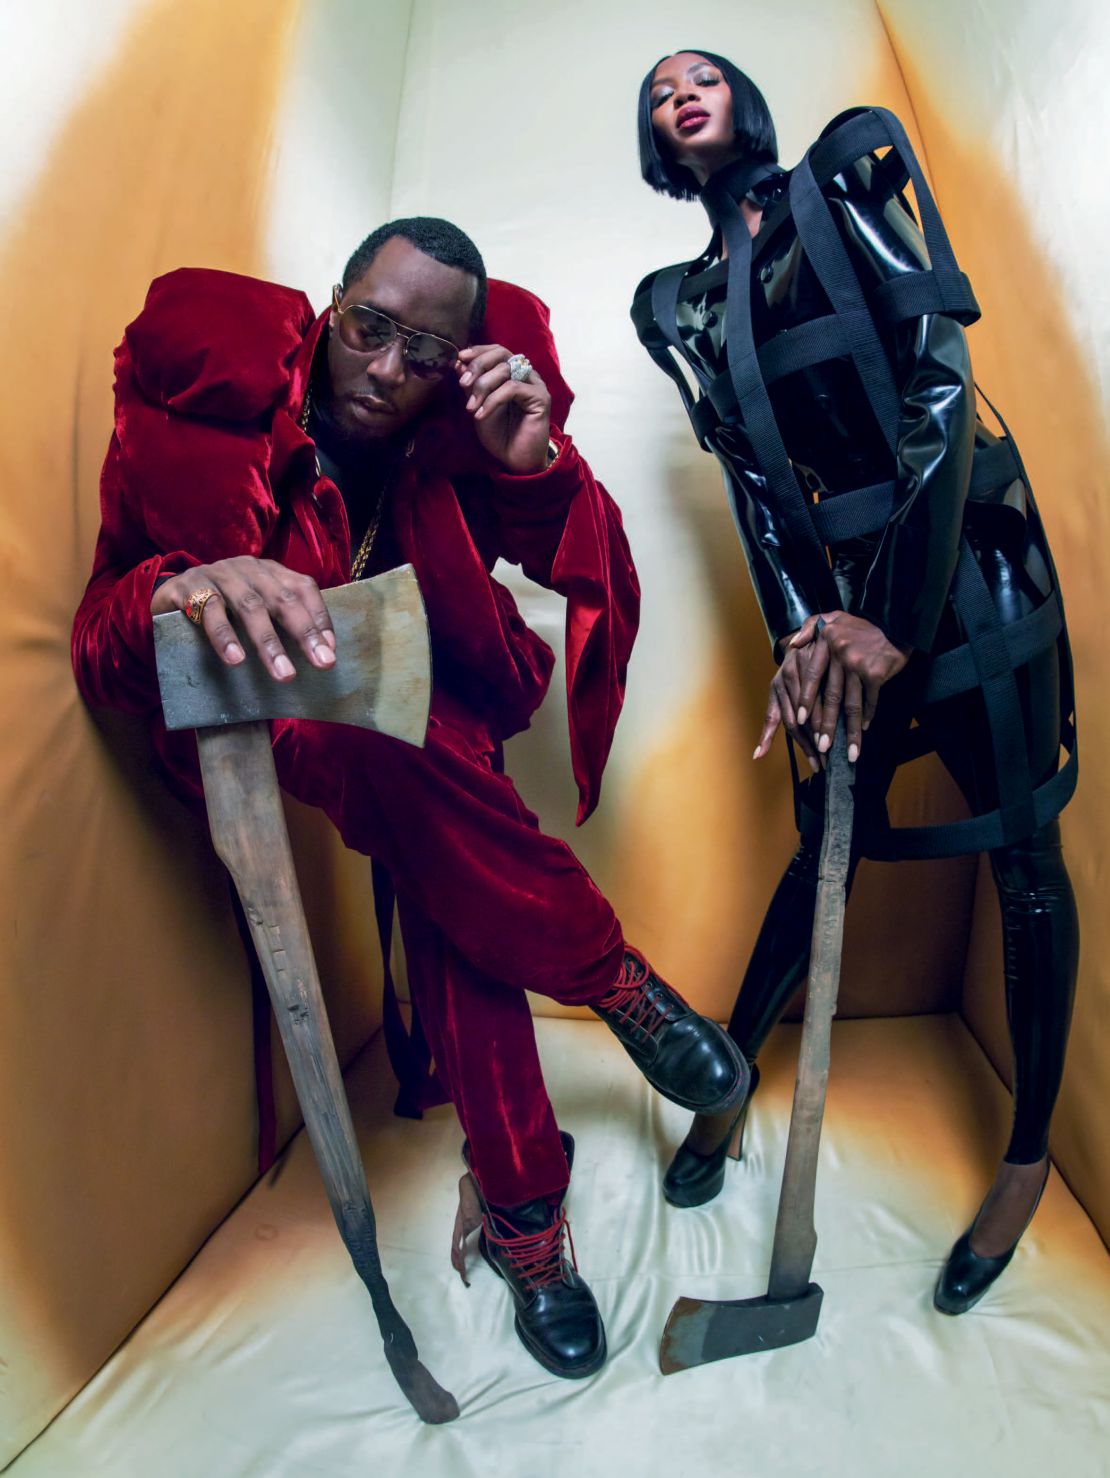 Naomi Campbell and Sean "Diddy" Combs and The Beheaders in the 2018 Pirelli calendar.